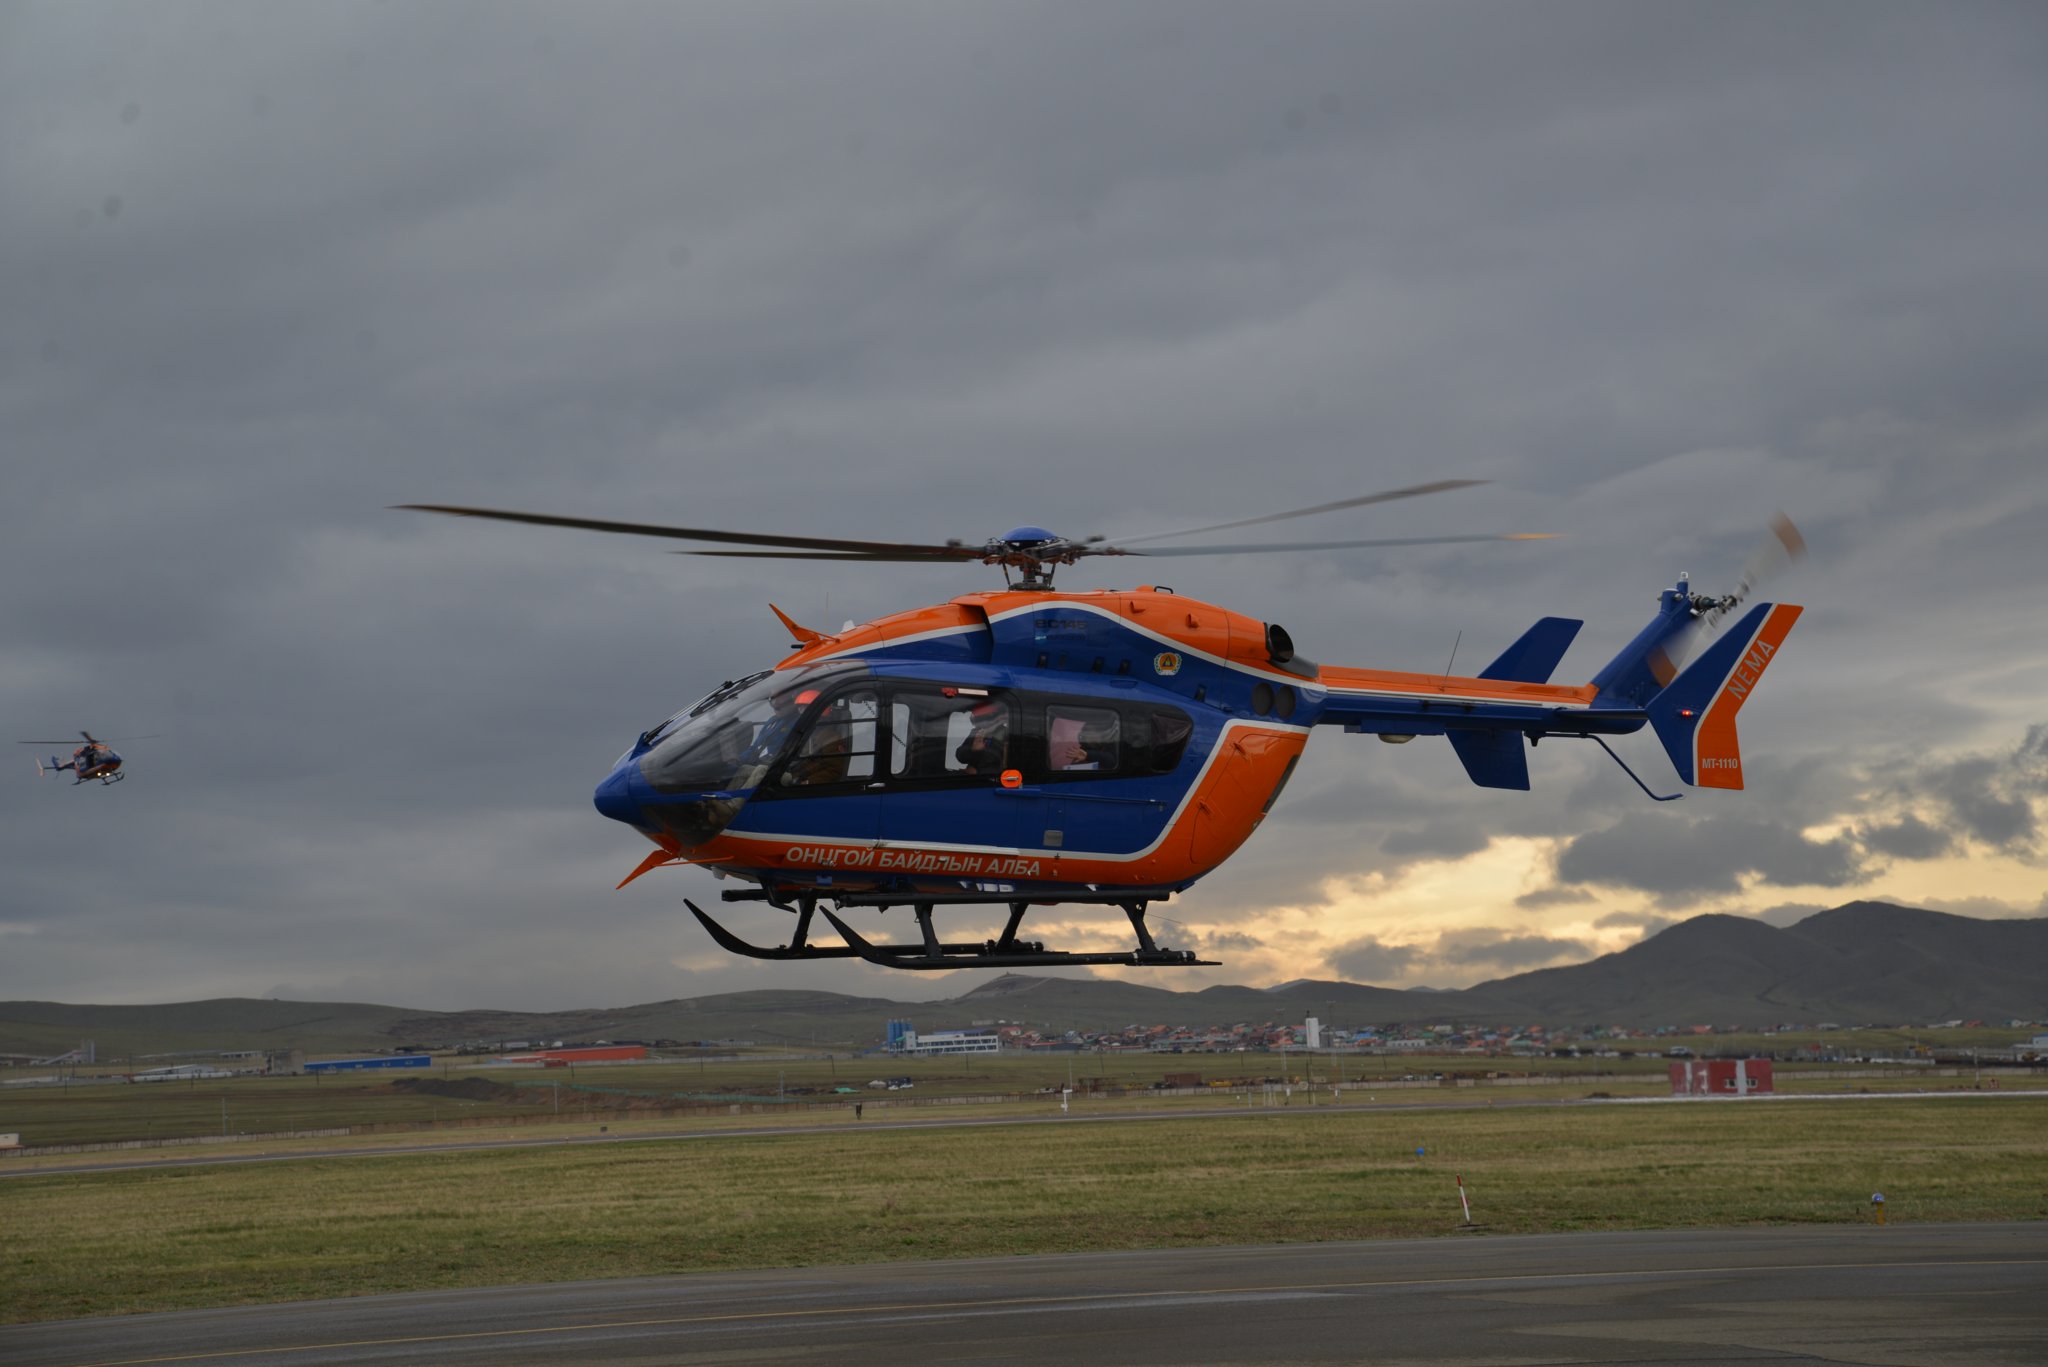 Does NEMA’s helicopter only serve the rich and ignore the rest?